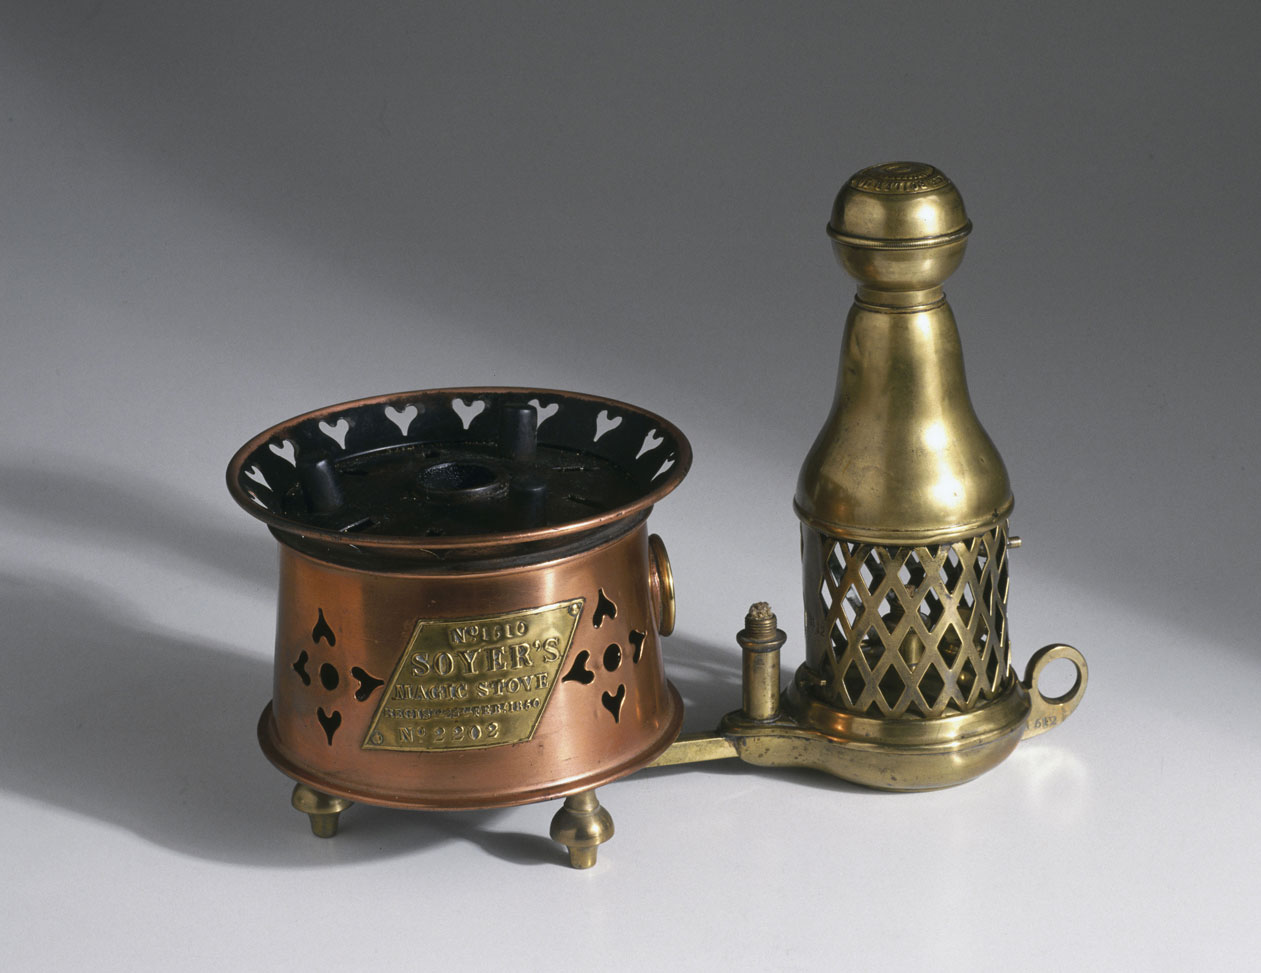 ‘Magic Stove’, Patented by Alexis Soyer and Alexander Symons in 1850. This type of stove was still being used by the British Army in the early 1980s.